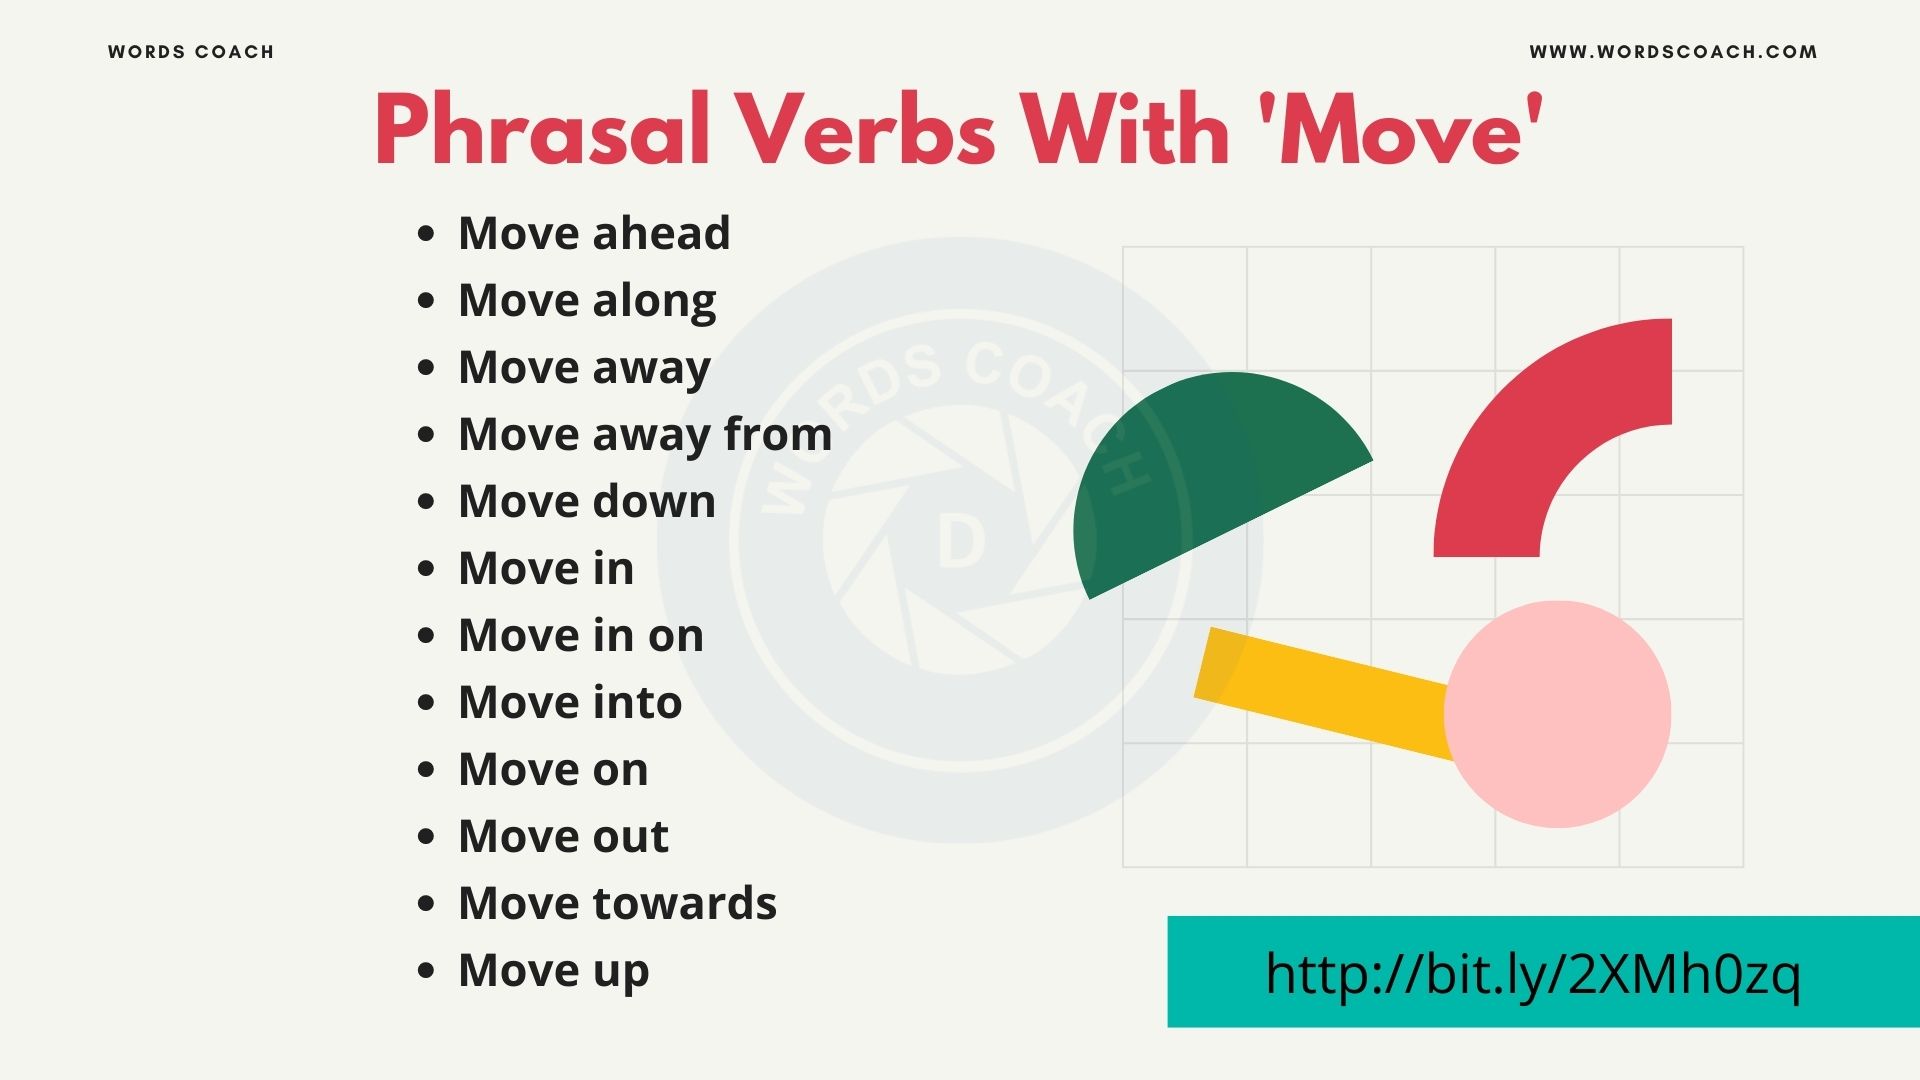 Phrasal Verbs With 'Move'